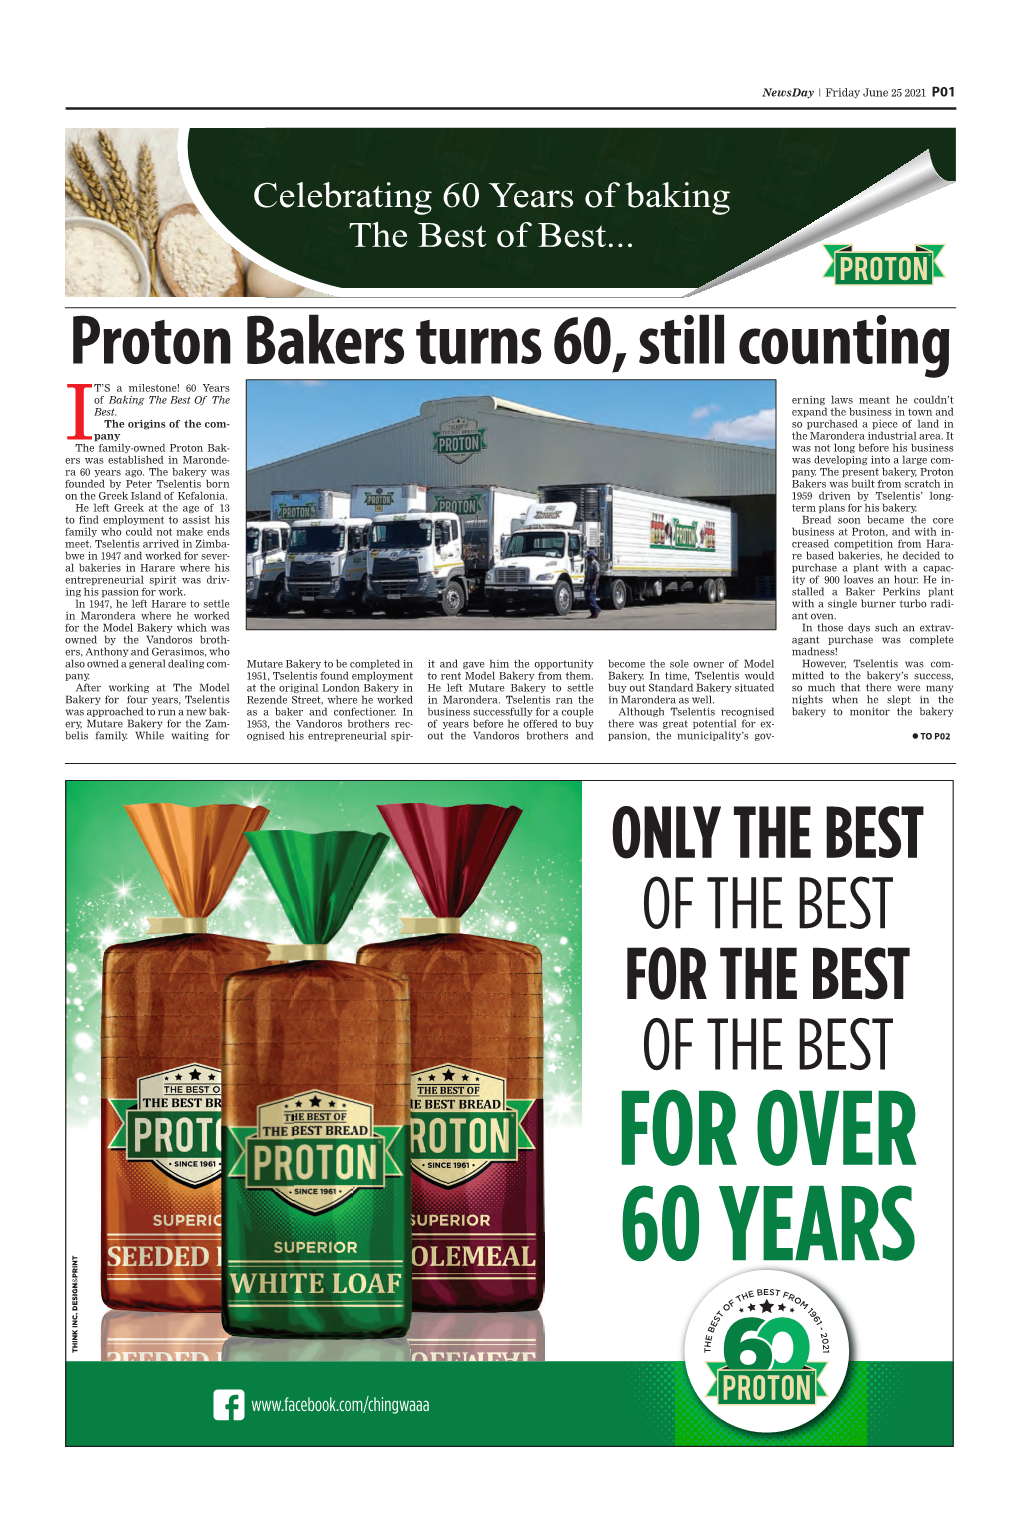 Proton Bakers Turns 60, Still Counting T’S a Milestone! 60 Years of Baking the Best of the Erning Laws Meant He Couldn’T Best